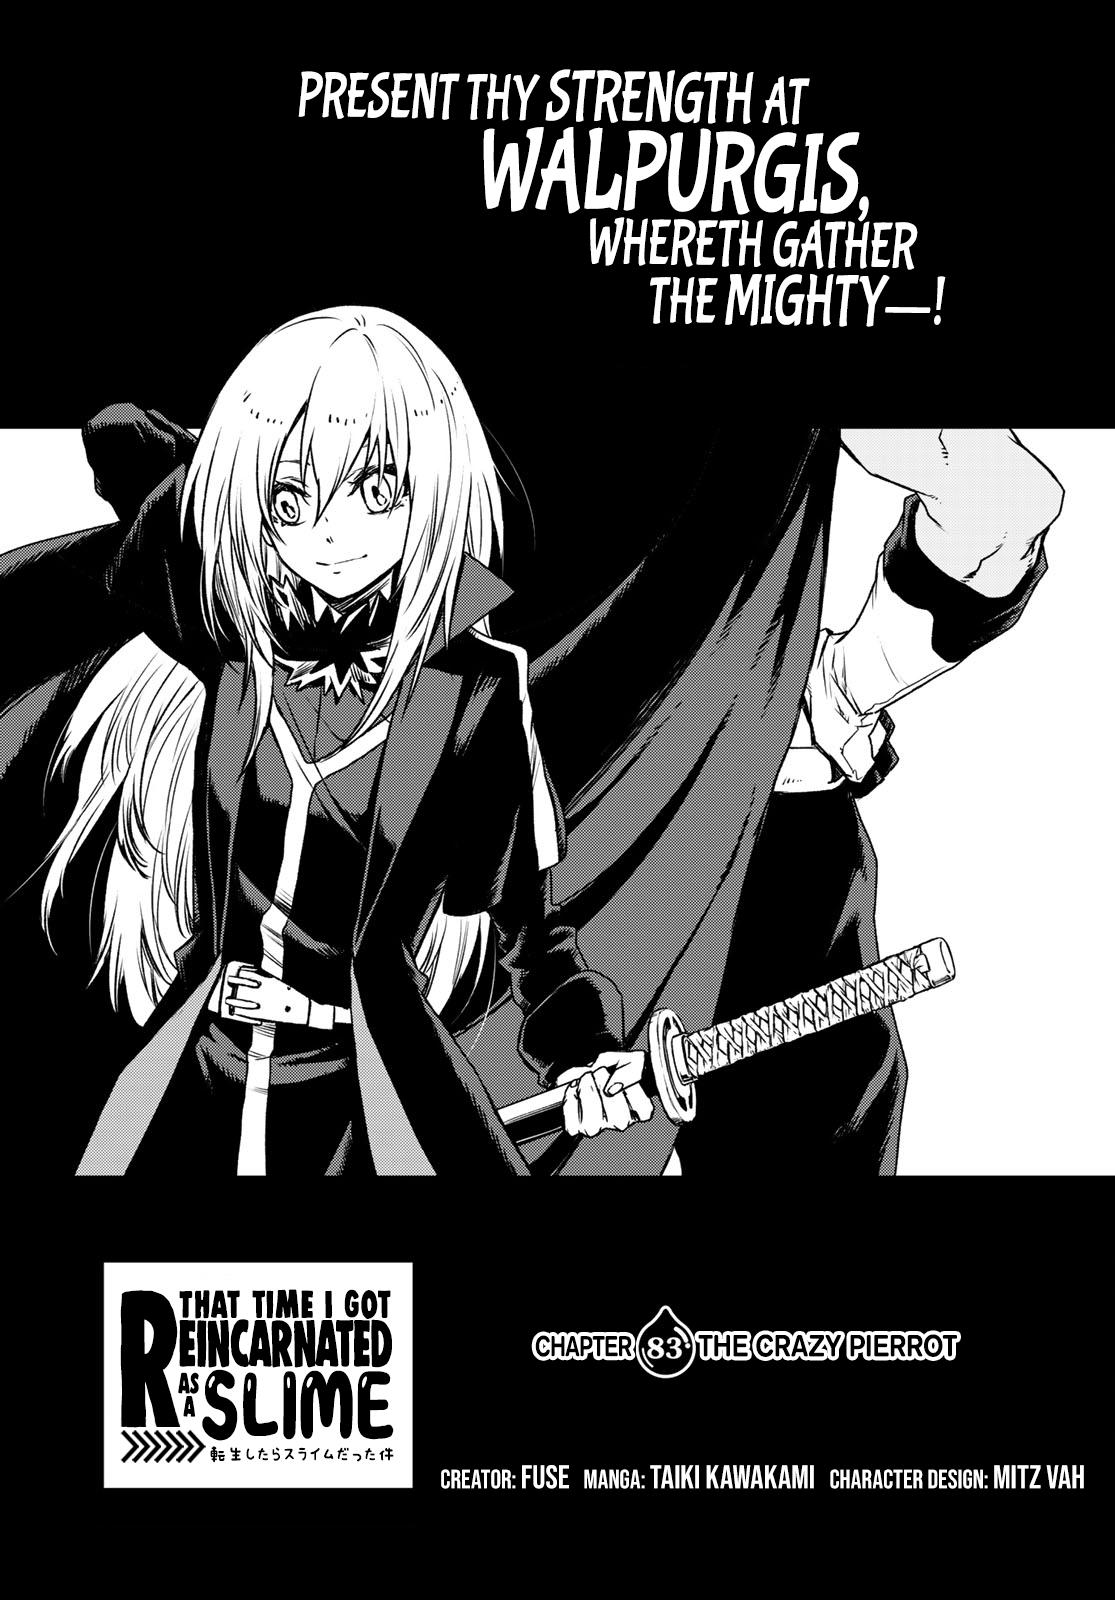 That Time I Got Reincarnated as a Slime, That Time I Got Reincarnated as a Slime manga, Tensei shitara Slime Datta Ken, Tensei shitara Slime Datta Ken manga, that time i got reincarnated as a slime wiki, that time i got reincarnated as a slime characters, that time i got reincarnated as a slime season 1, that time i got reincarnated as a slime episode list, that time i got reincarnated as a slime season 2 release date, that time i got reincarnated as a slime japanese name, that time i got reincarnated as a slime oad, that time i got reincarnated as a slime crunchyroll, that time i got reincarnated as a slime light novel